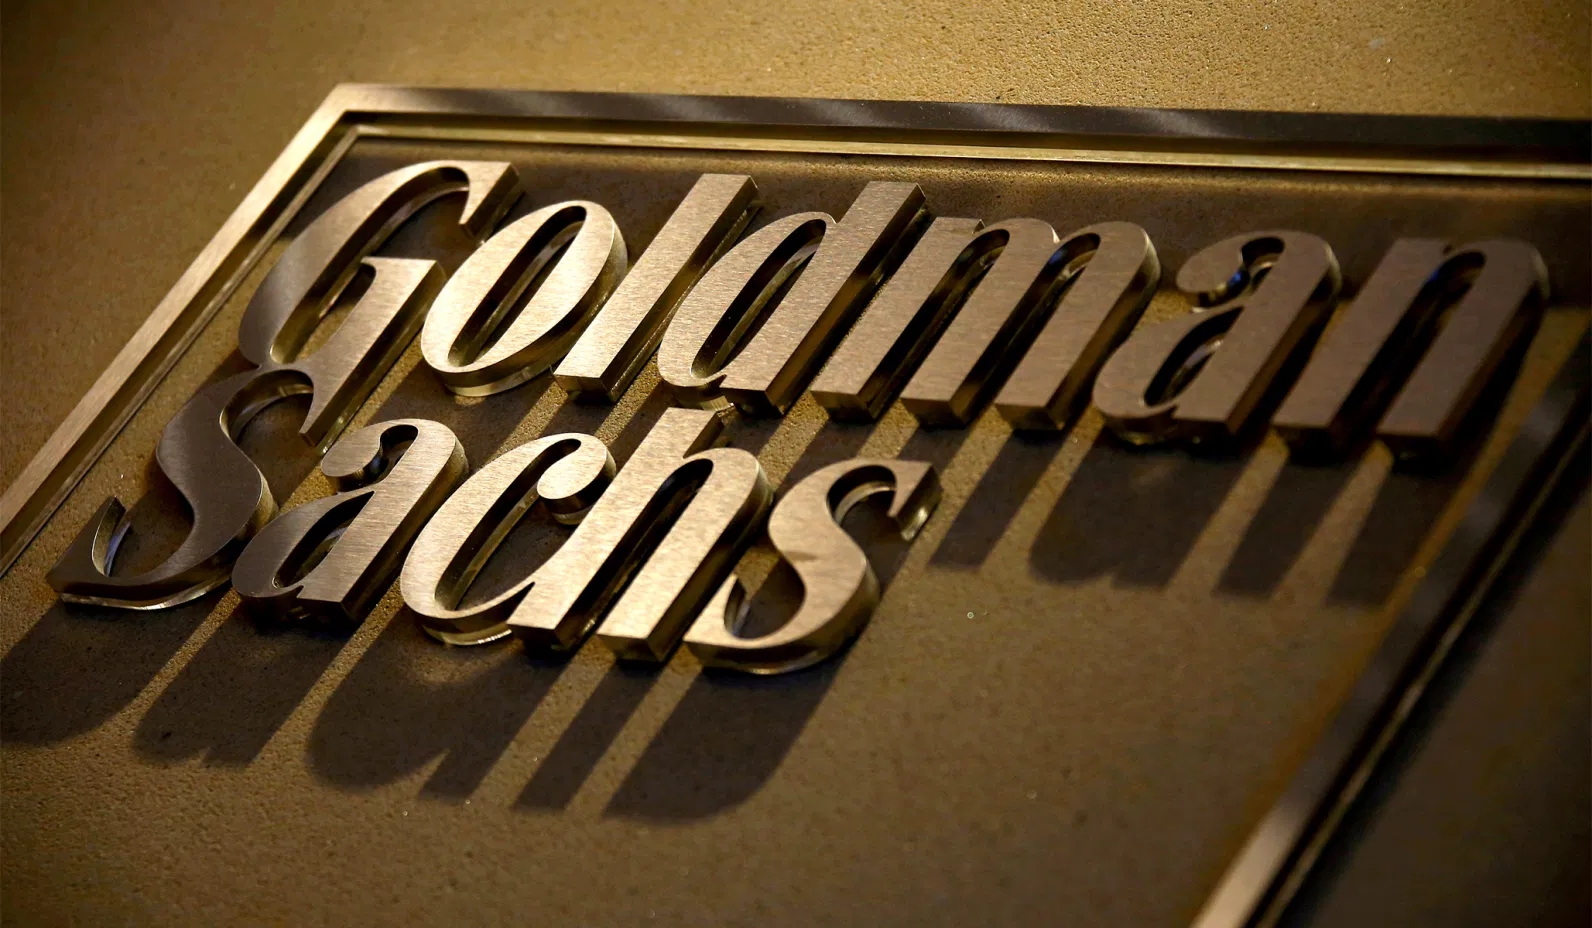 Goldman Sachs Division Considers Leaving New York Over City Mismanagement And Taxation